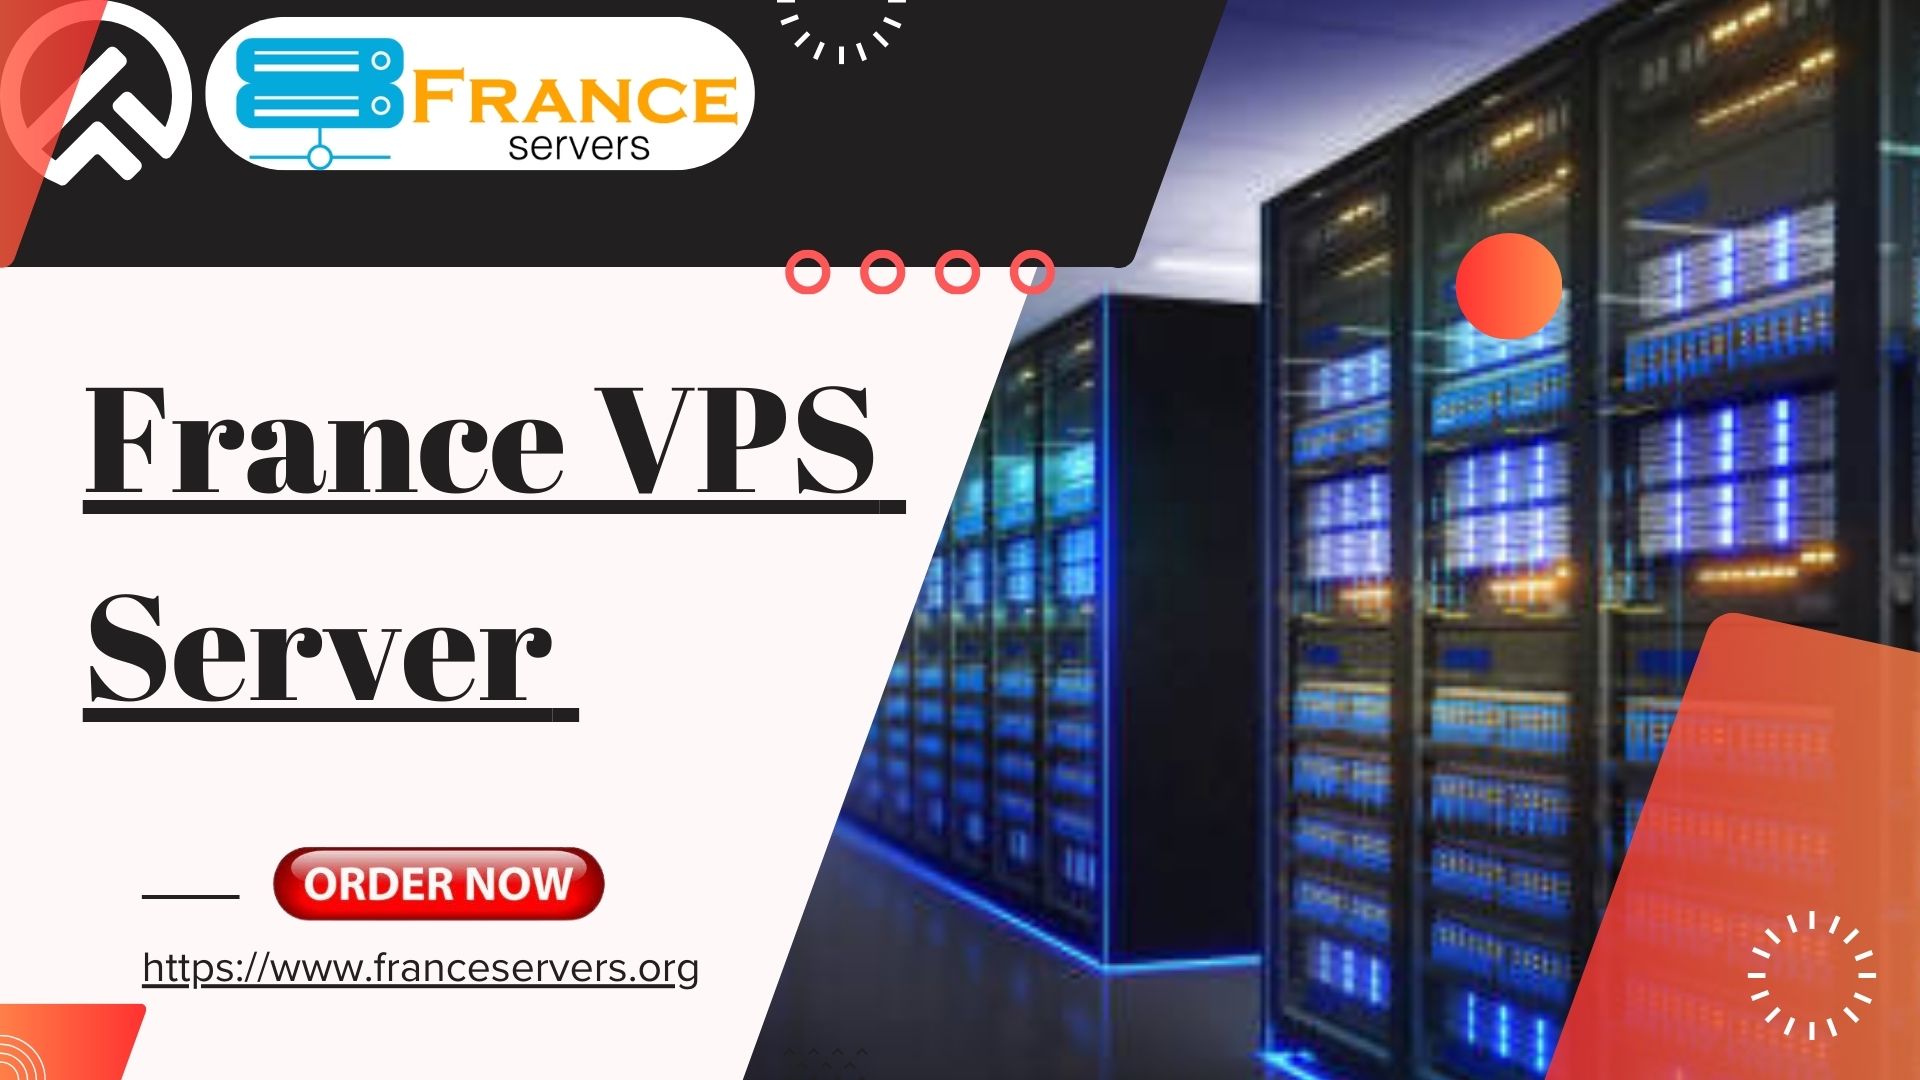 Say Goodbye to Expensive Hosting: Buy a France VPS Server for your Business